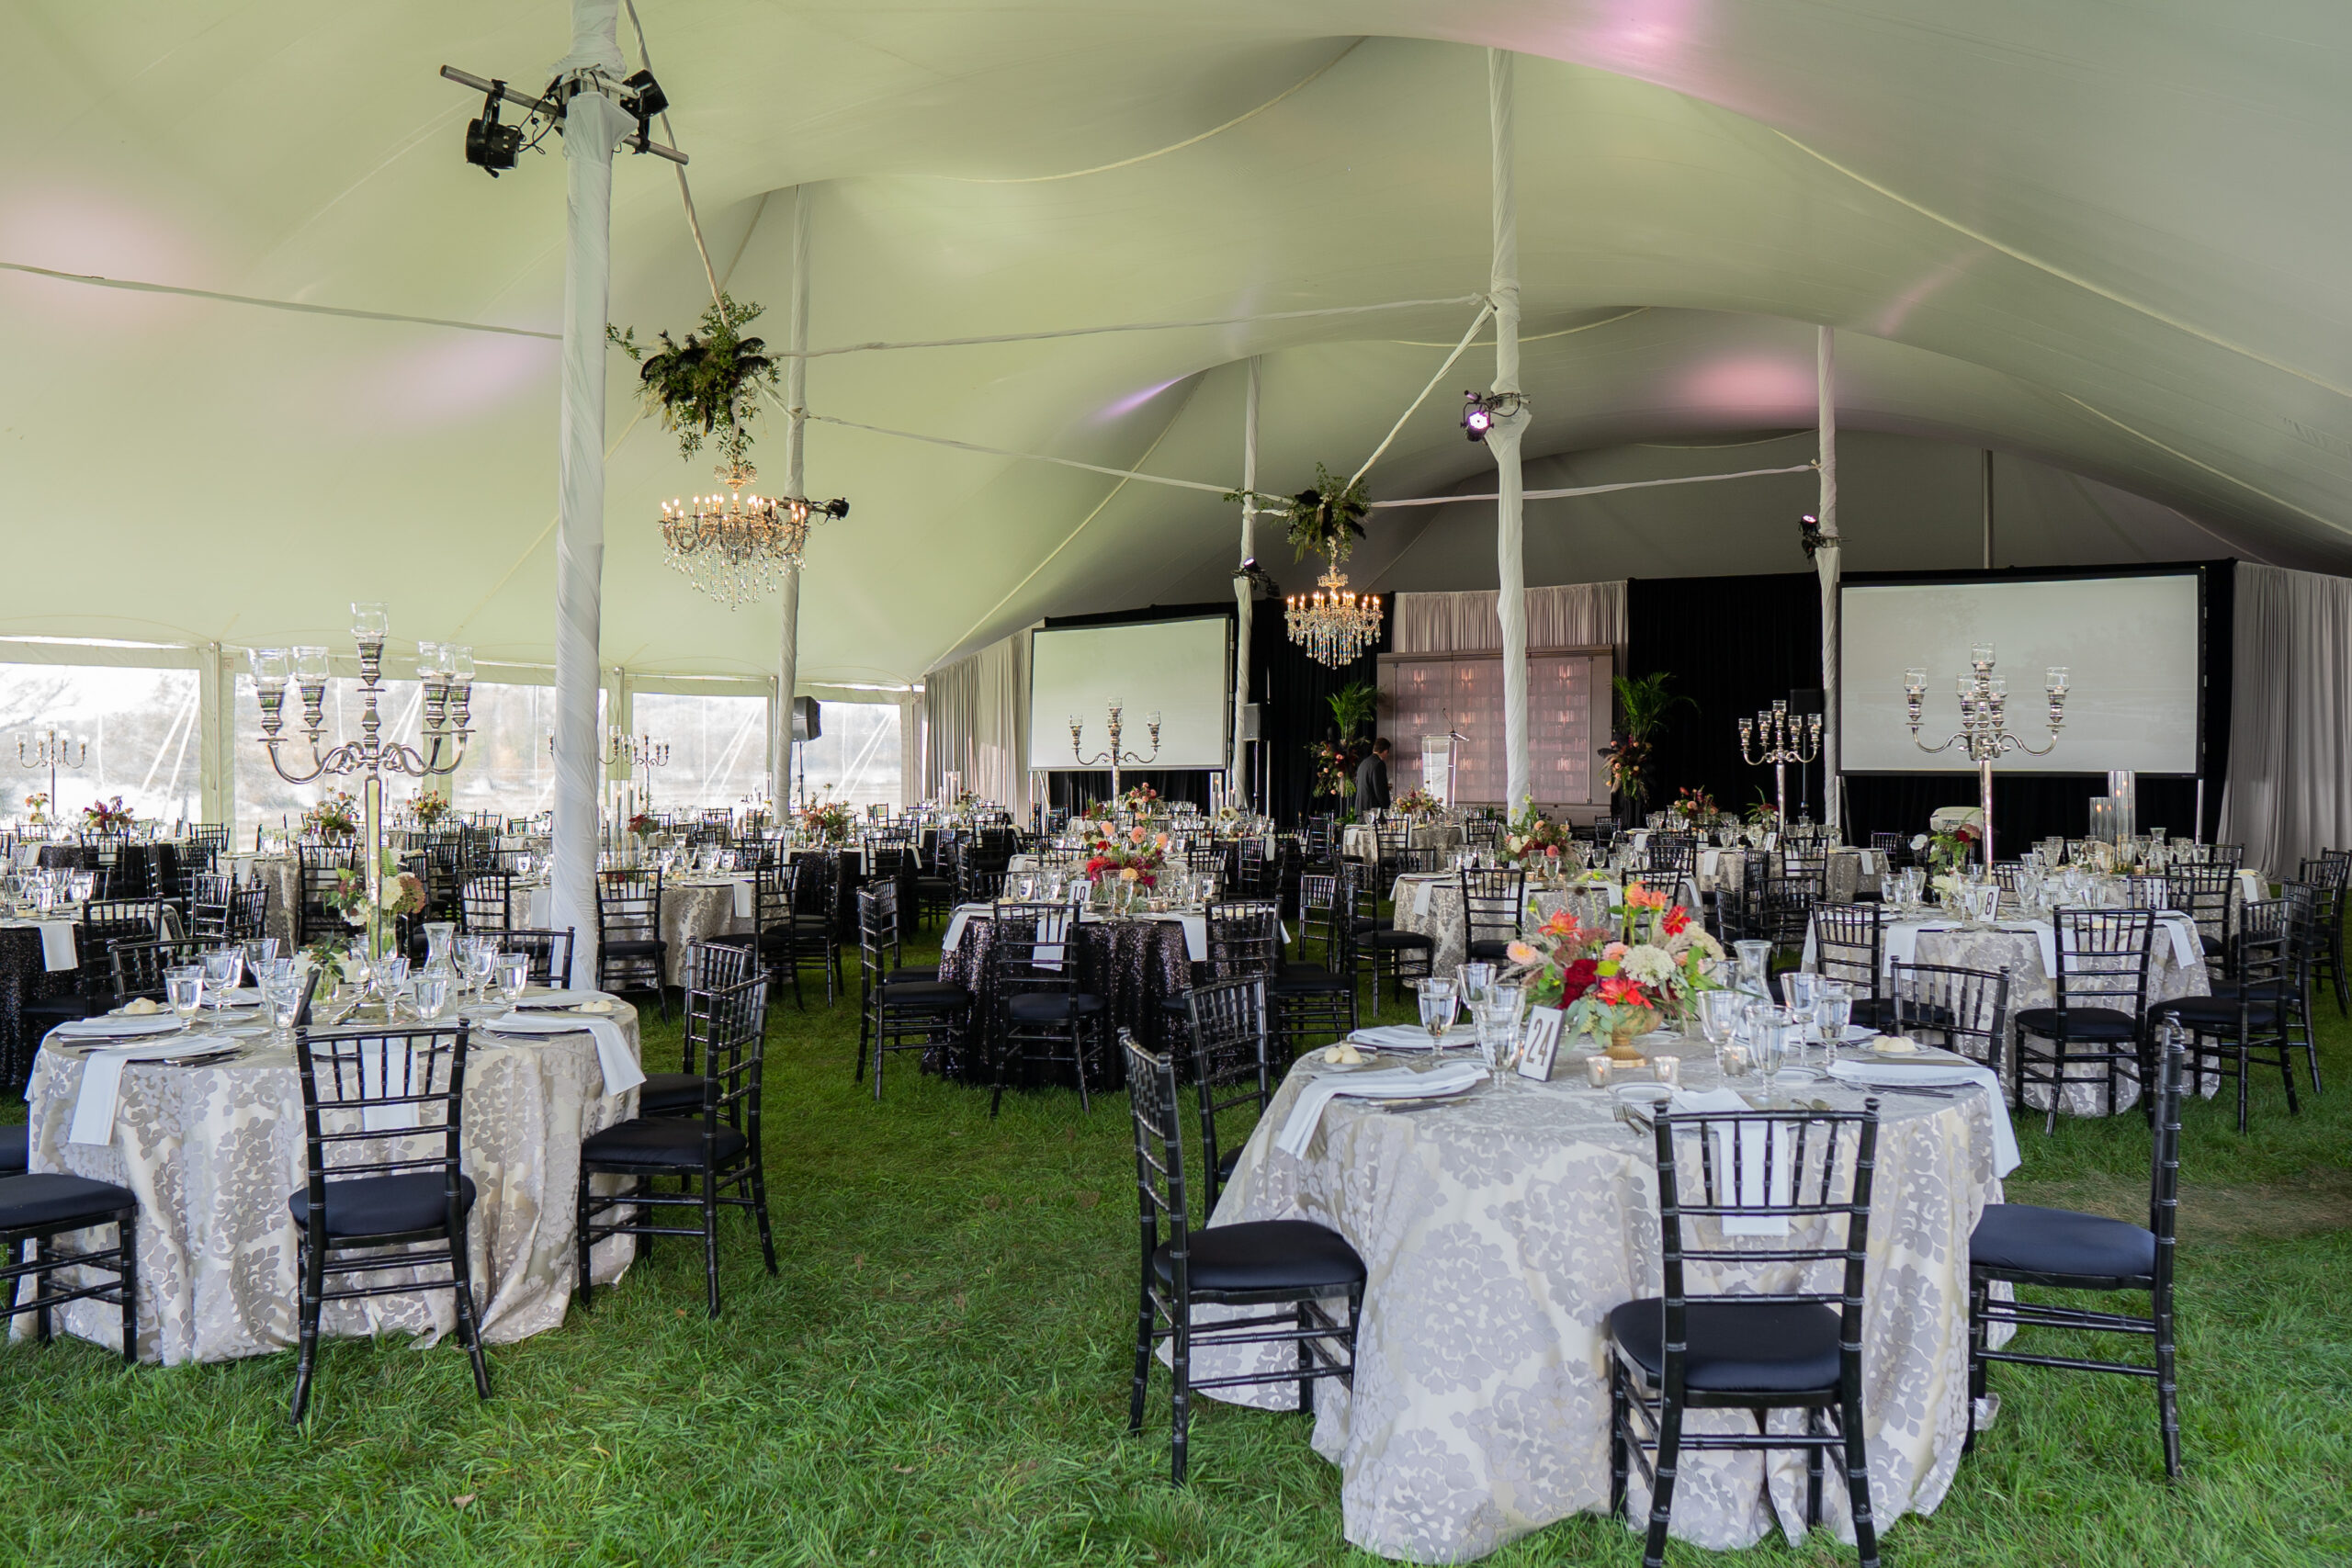 Banquet seating, a stage rental, and projector screens under a pole tent for a picnic in the park in Madison, WI.